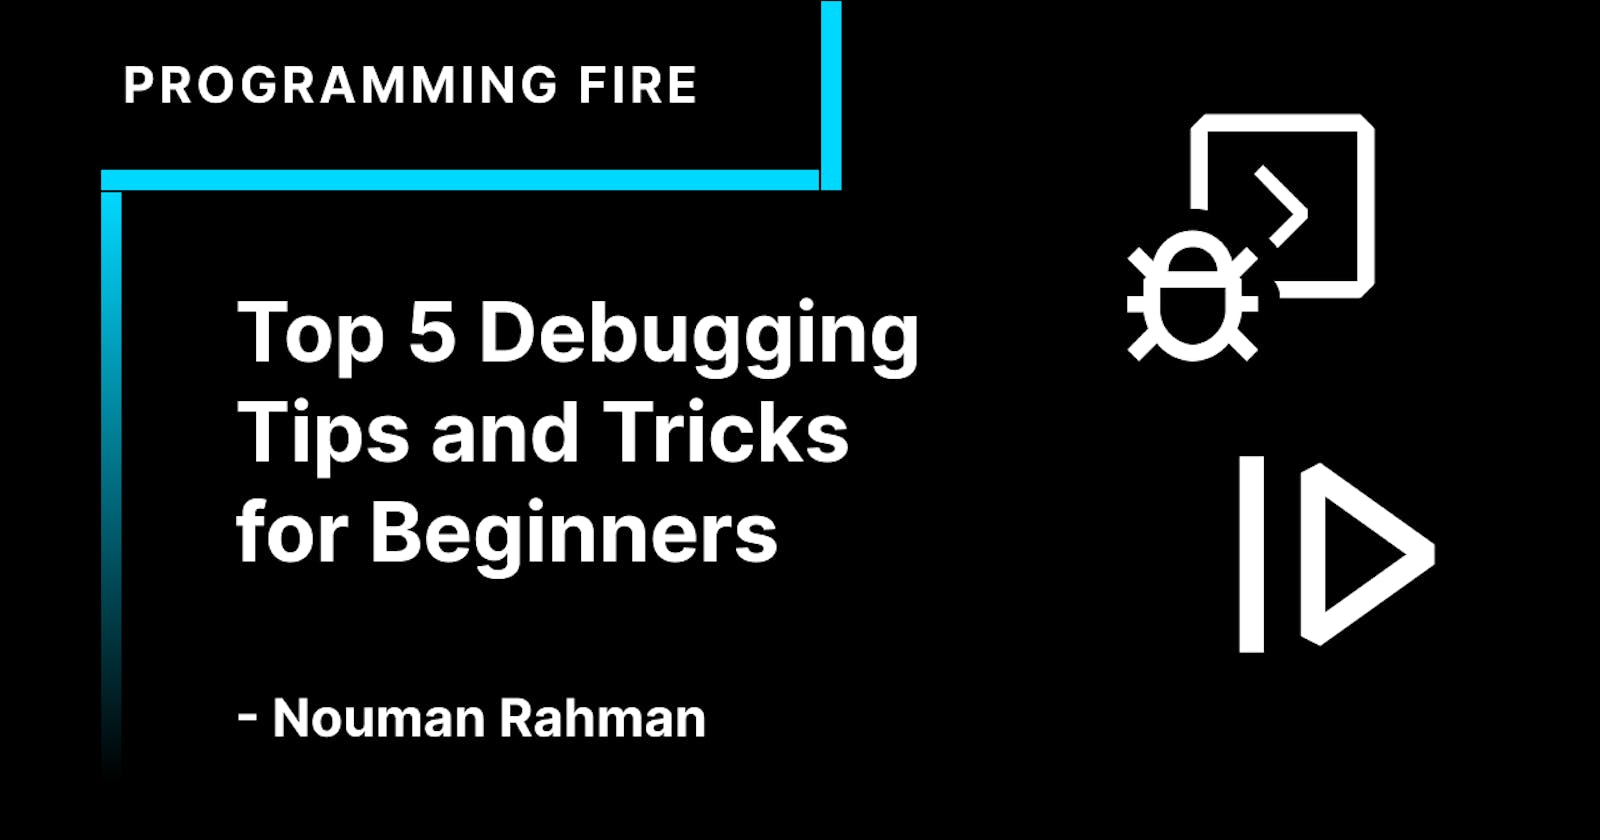 Top 5 Debugging Tips and Tricks for Beginners